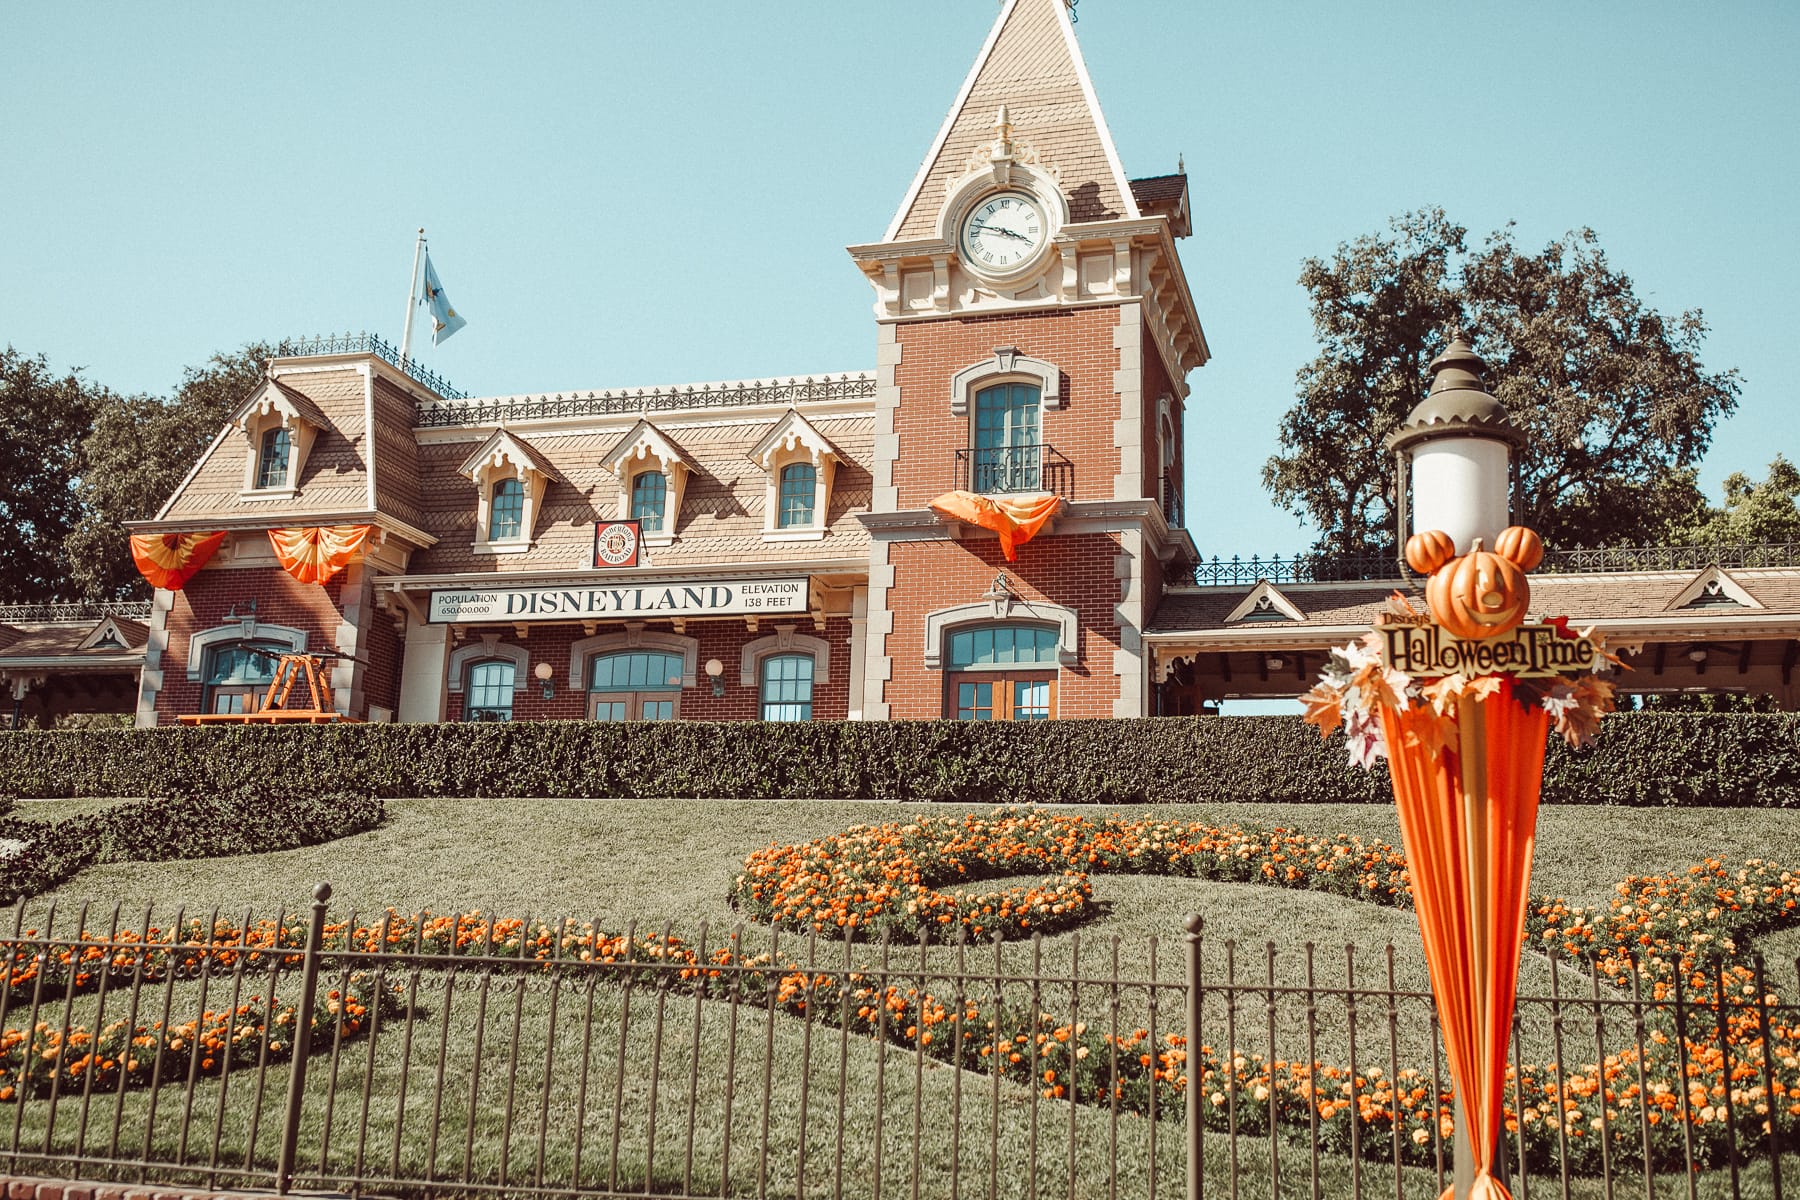 Disneyland Halloween Time Decorations at the front of the theme park.